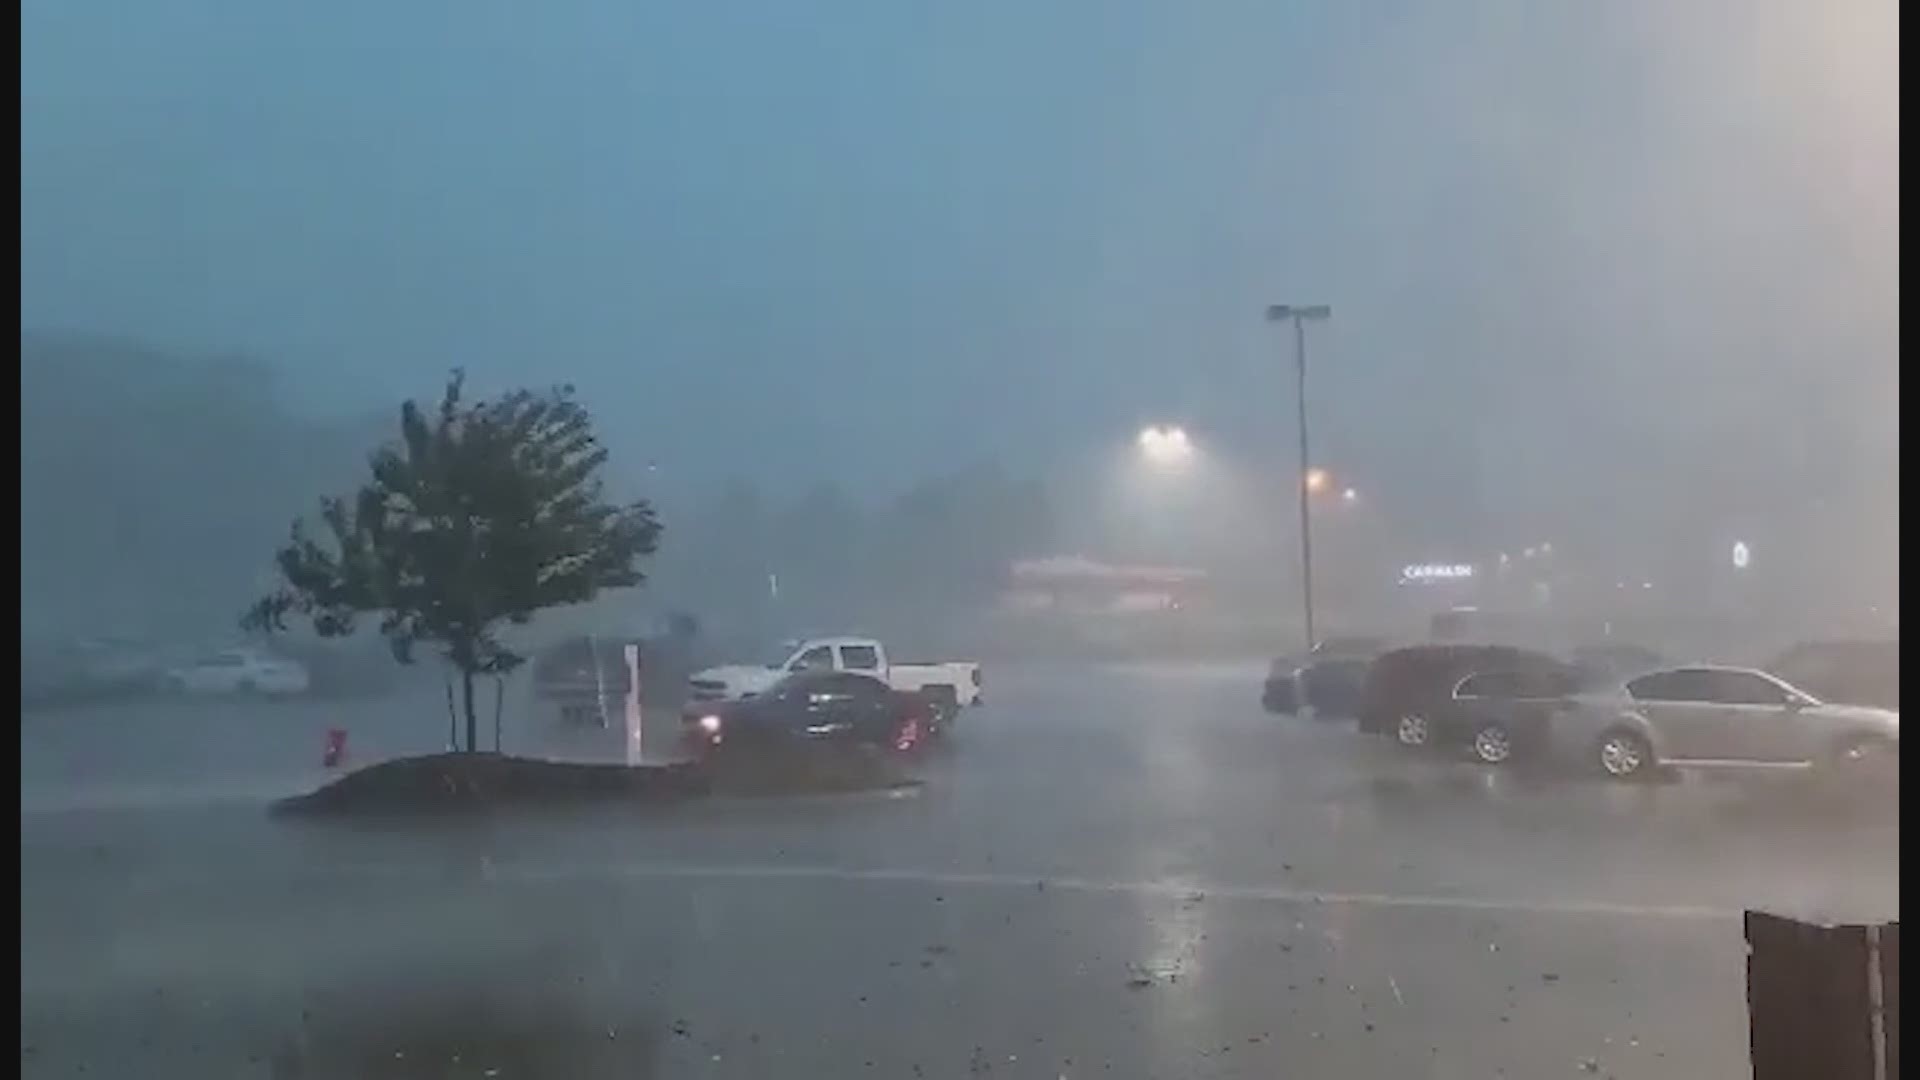 Wind and rain slam into Ames the morning of August 10, 2020. Credit: Charlie Hull